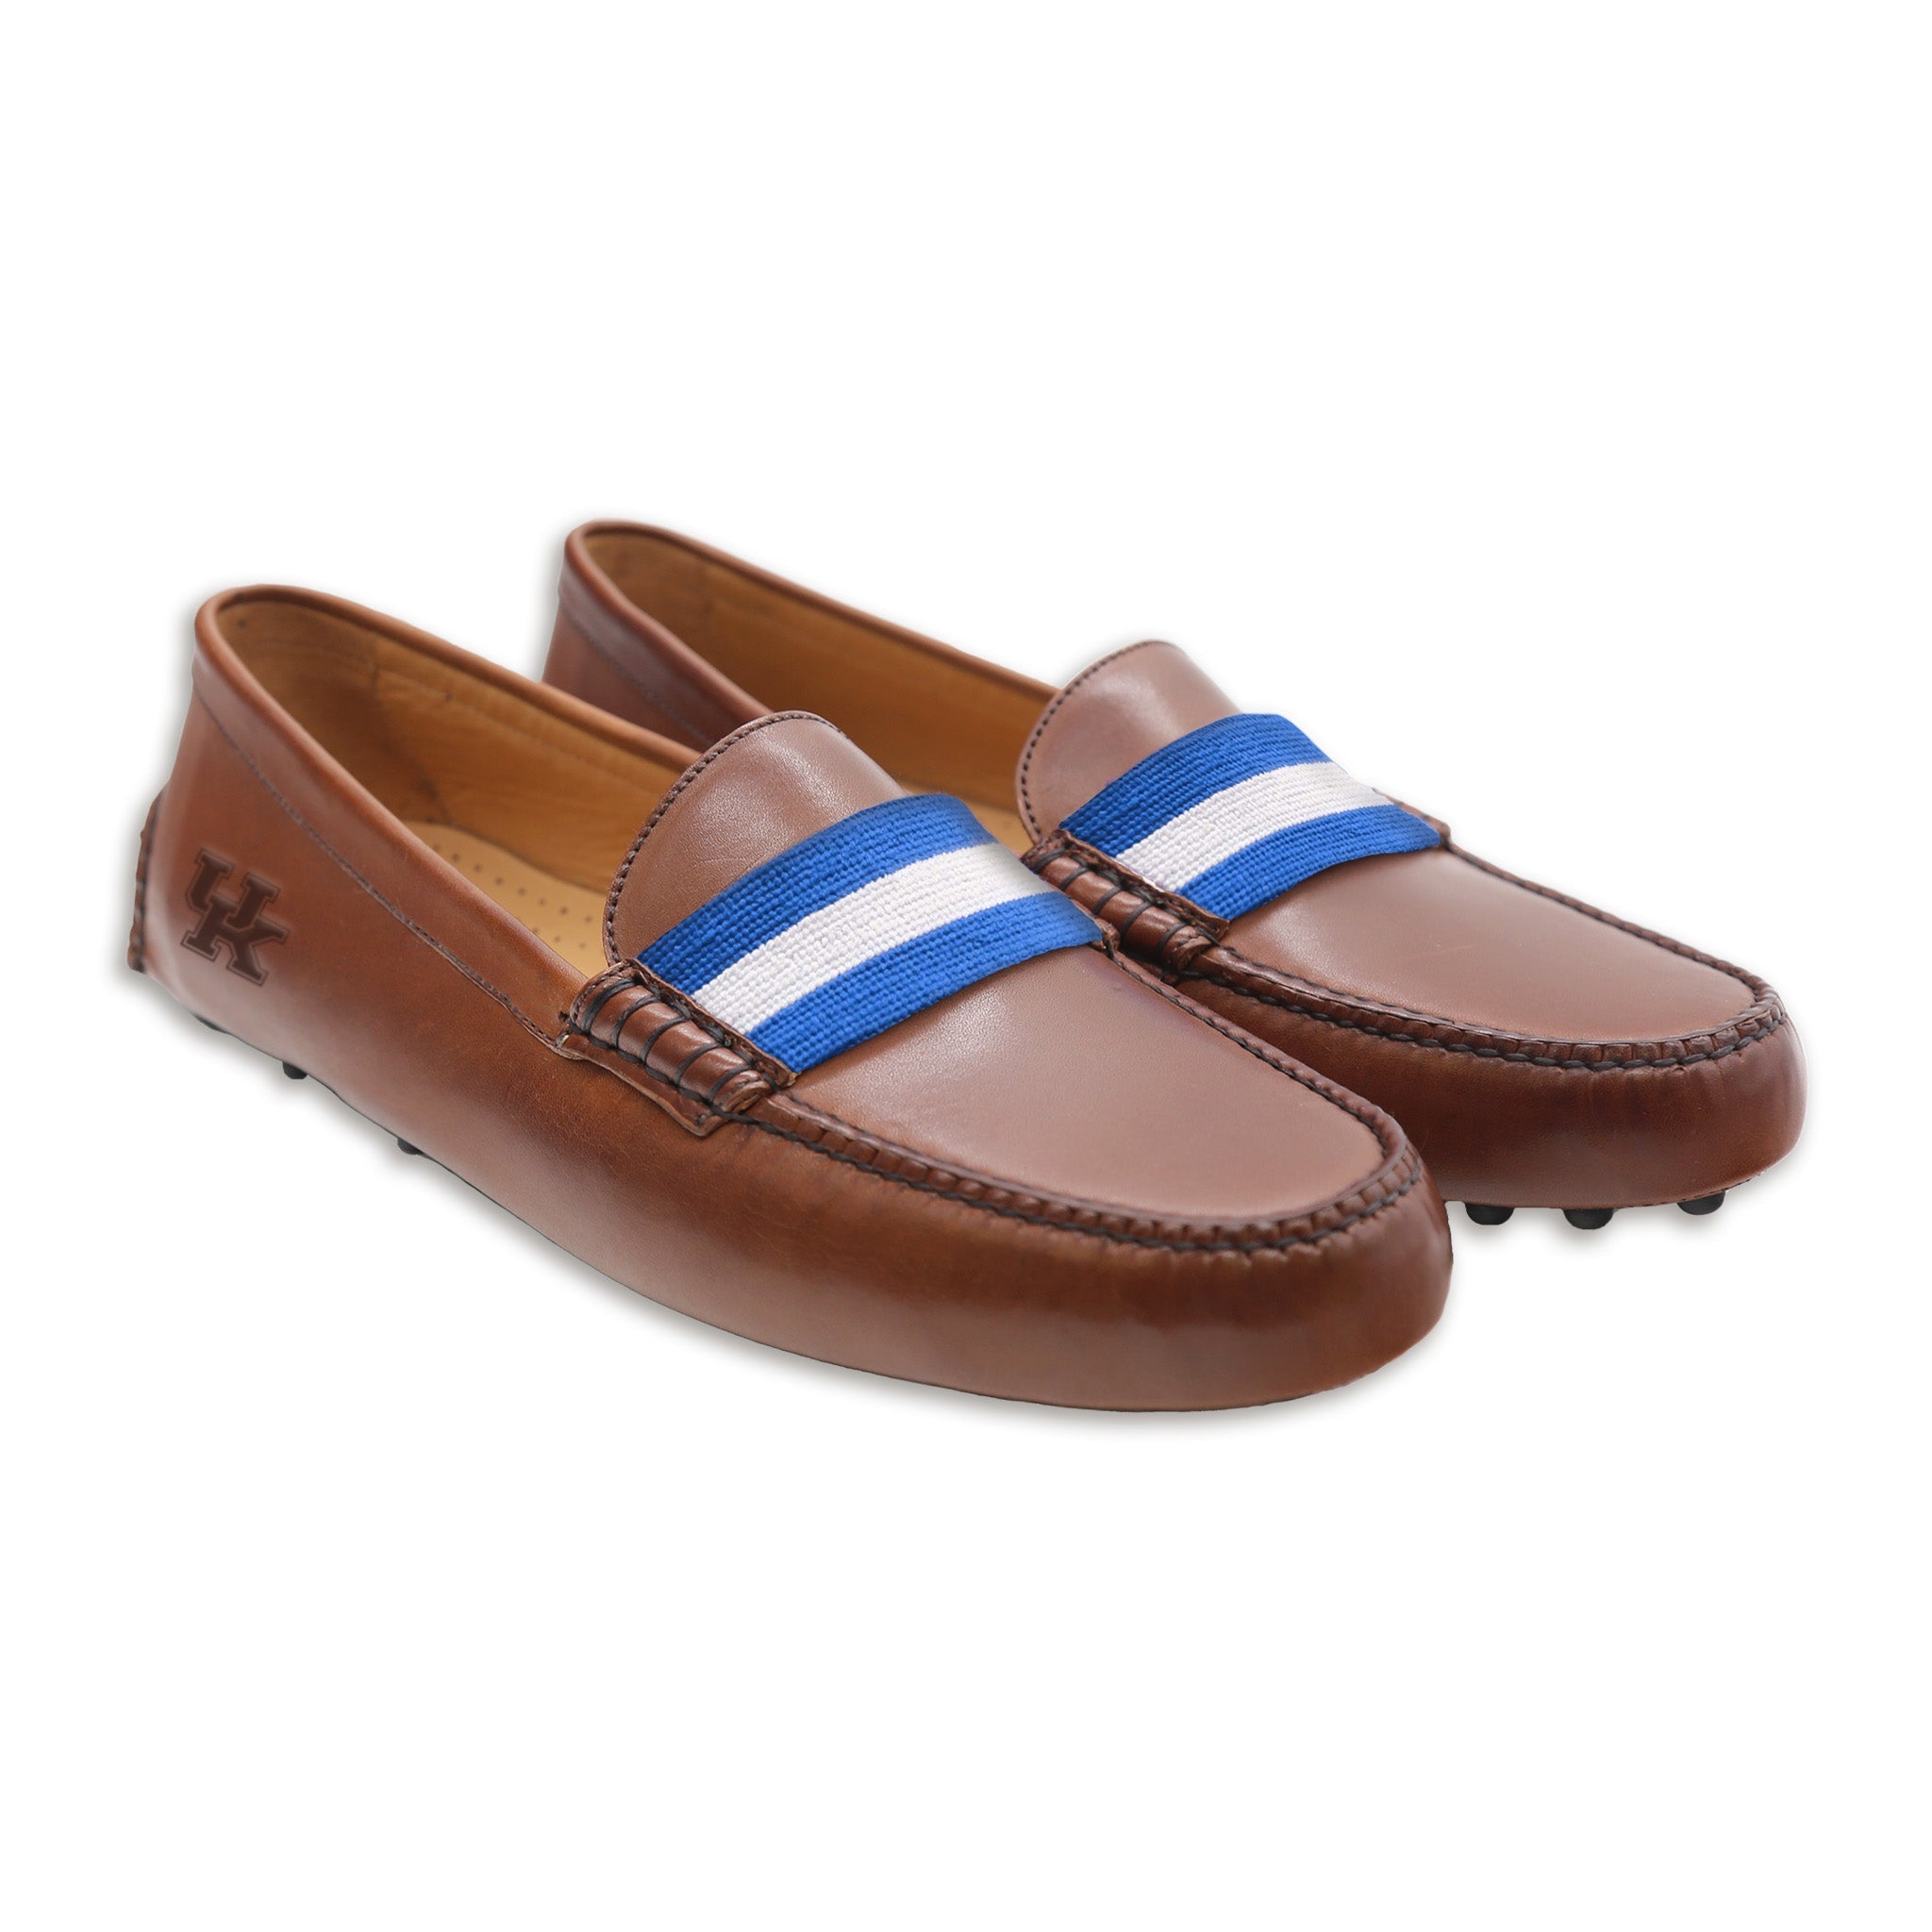 Leather-Logo) (Chestnut & Surcingle Smathers – Branson Driving (Blue-White) Kentucky Shoes